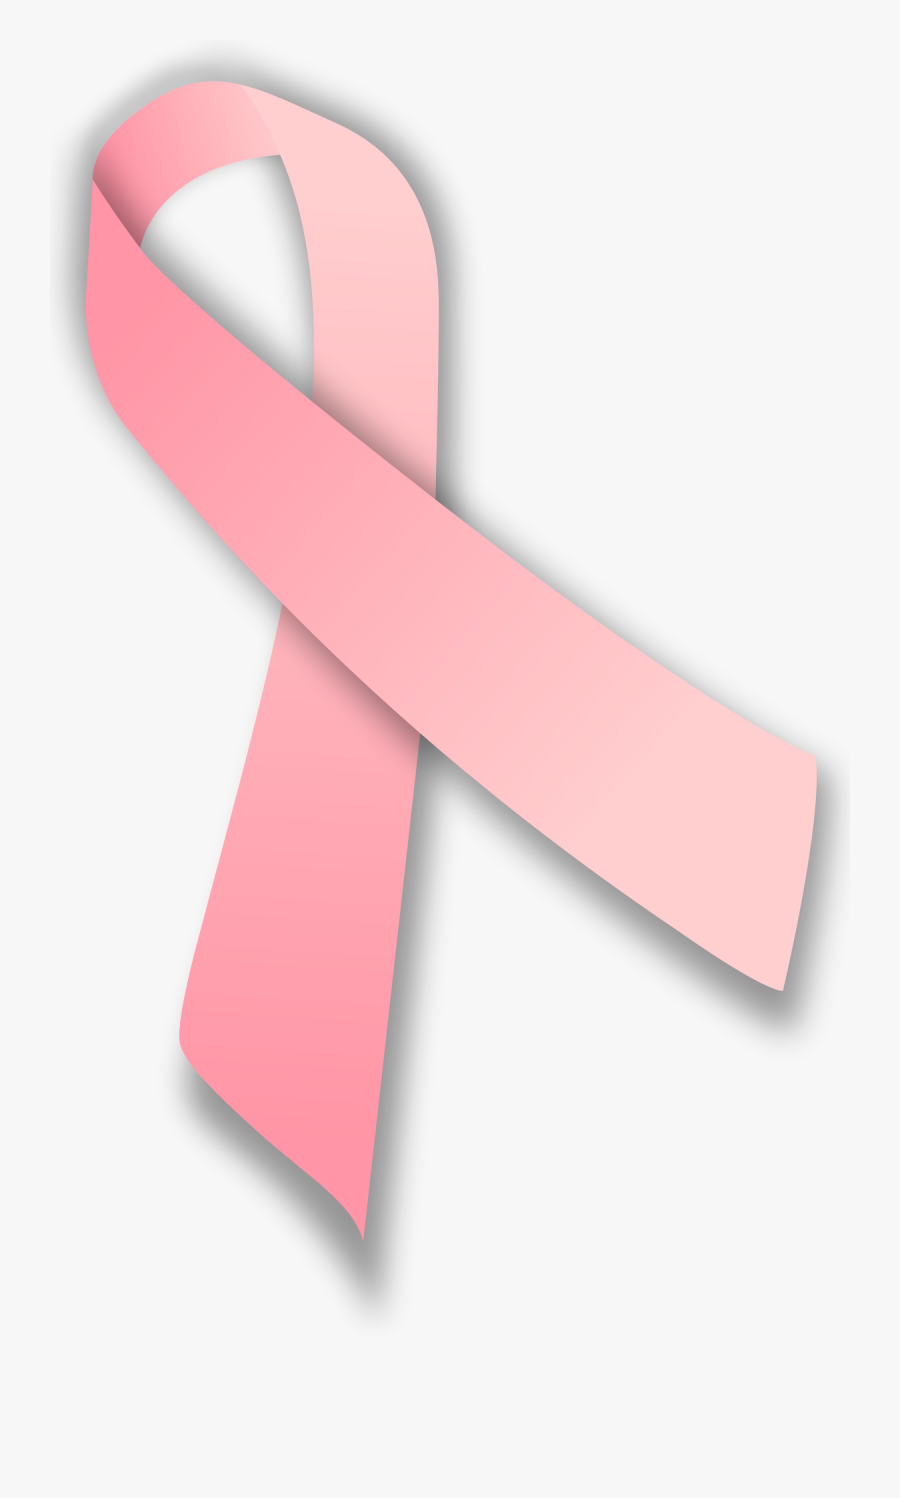 Pink Ribbon Clip Art Of Ribbons For Breast Cancer Awareness - Pink Ribbon Png, Transparent Clipart